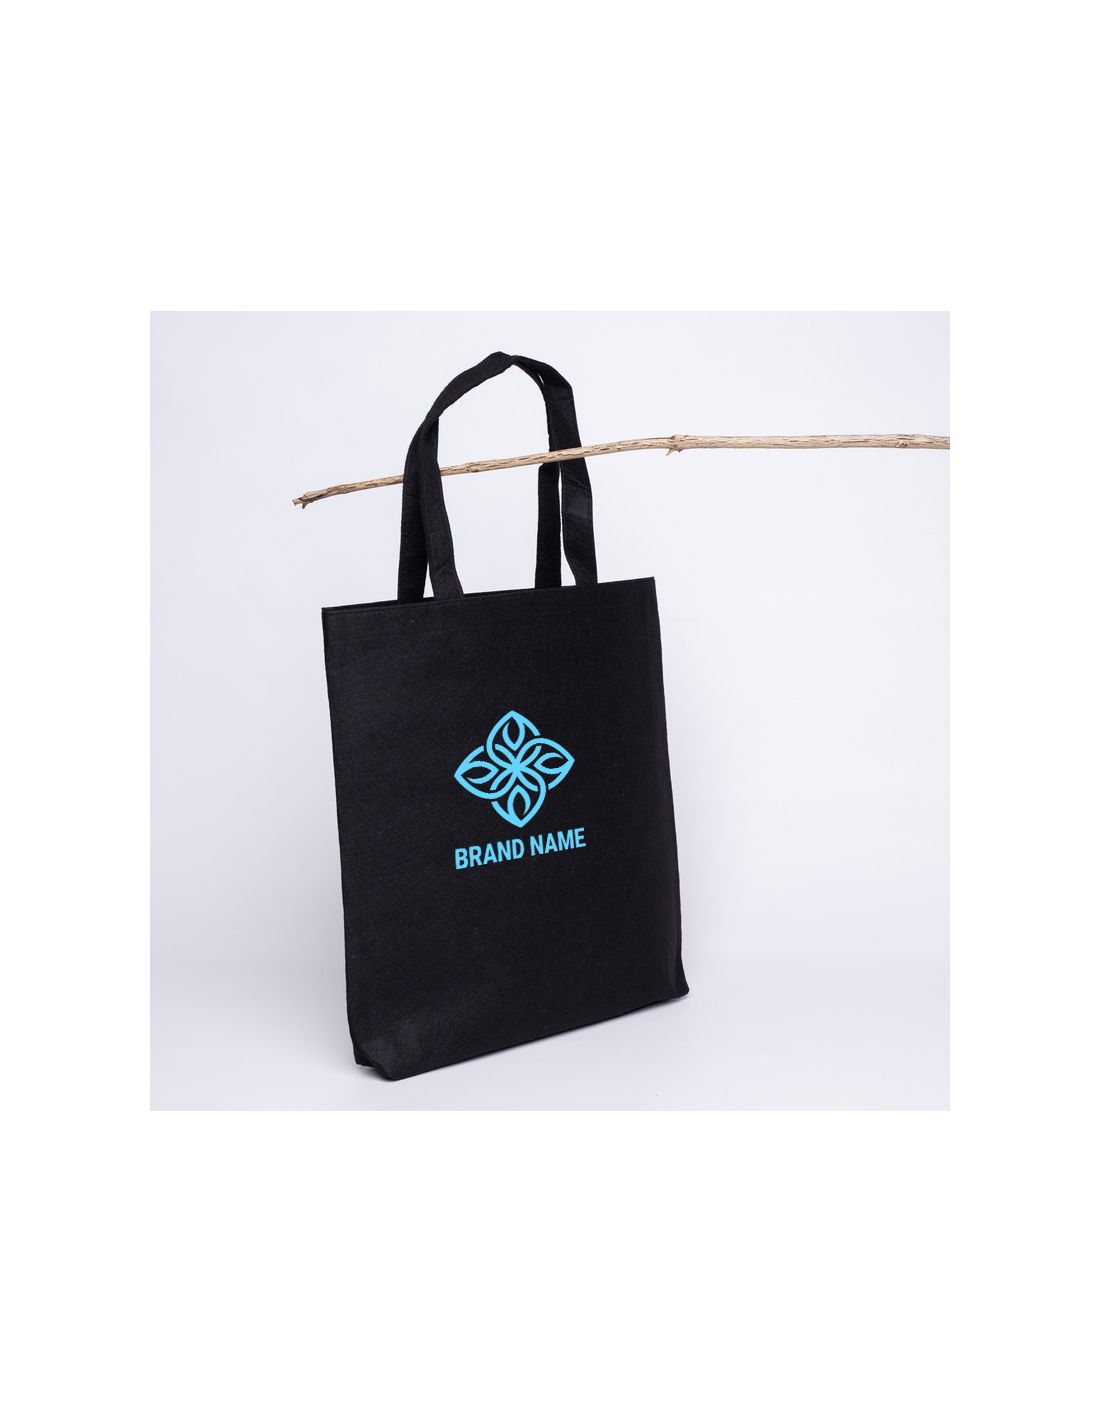 Customized Personalized reusable felt bag 41x41 +7 CM | TOTE FELT BAG | SCREEN PRINTING ON ONE SIDE IN ONE COLOUR